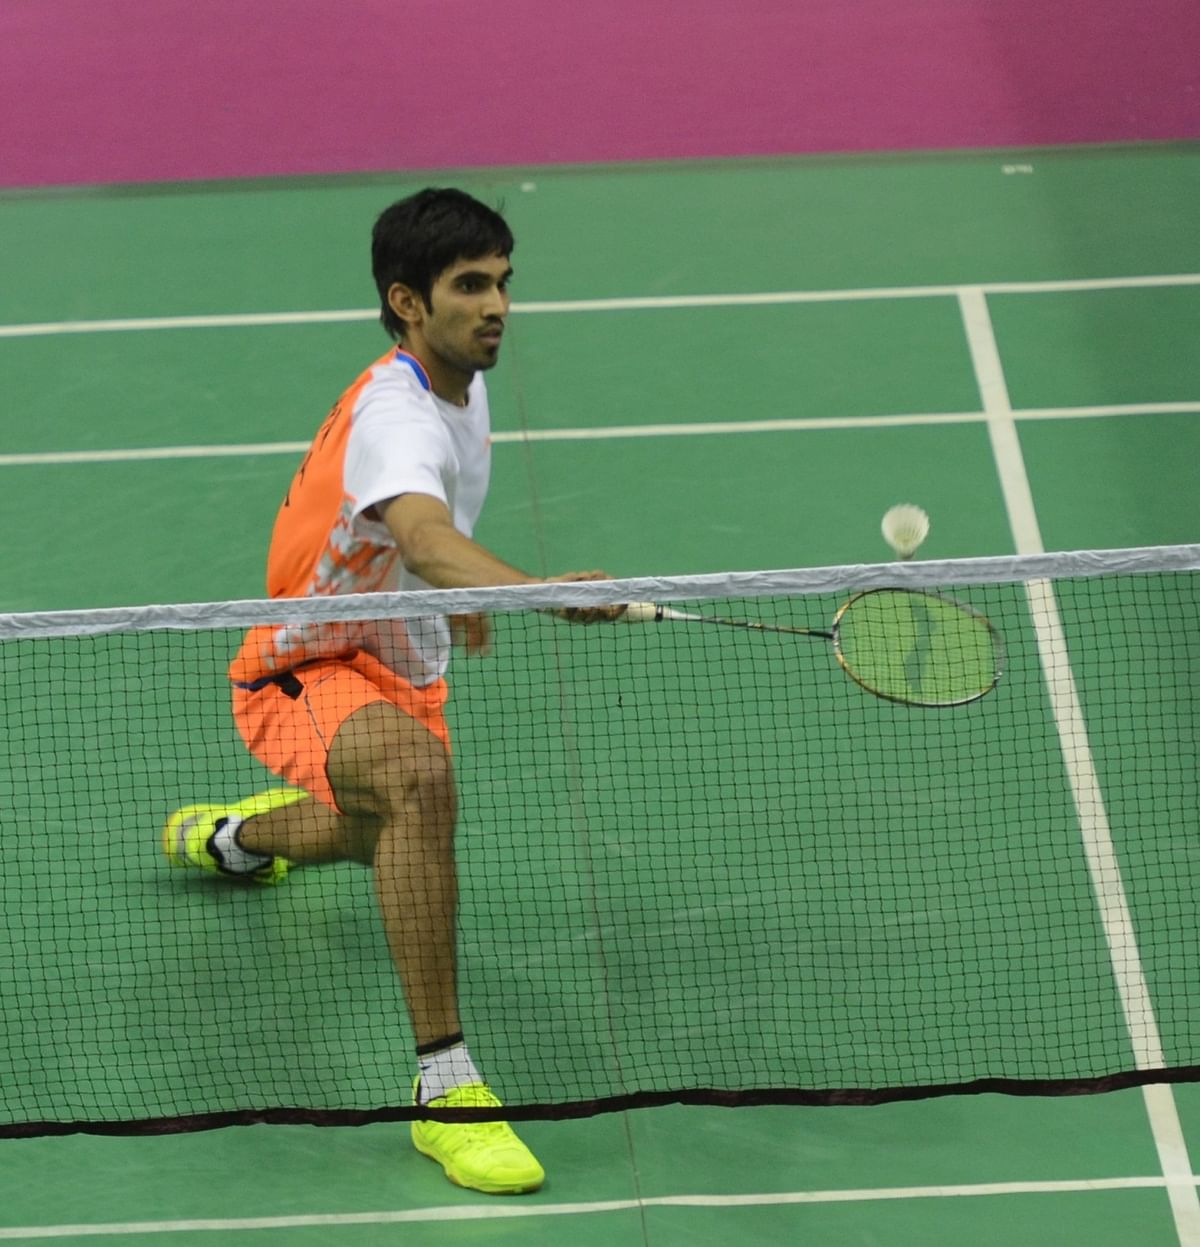  Top seed Srikanth needed just 32 minutes to come out on top with a 21-14, 21-7 victory in the semi-final.